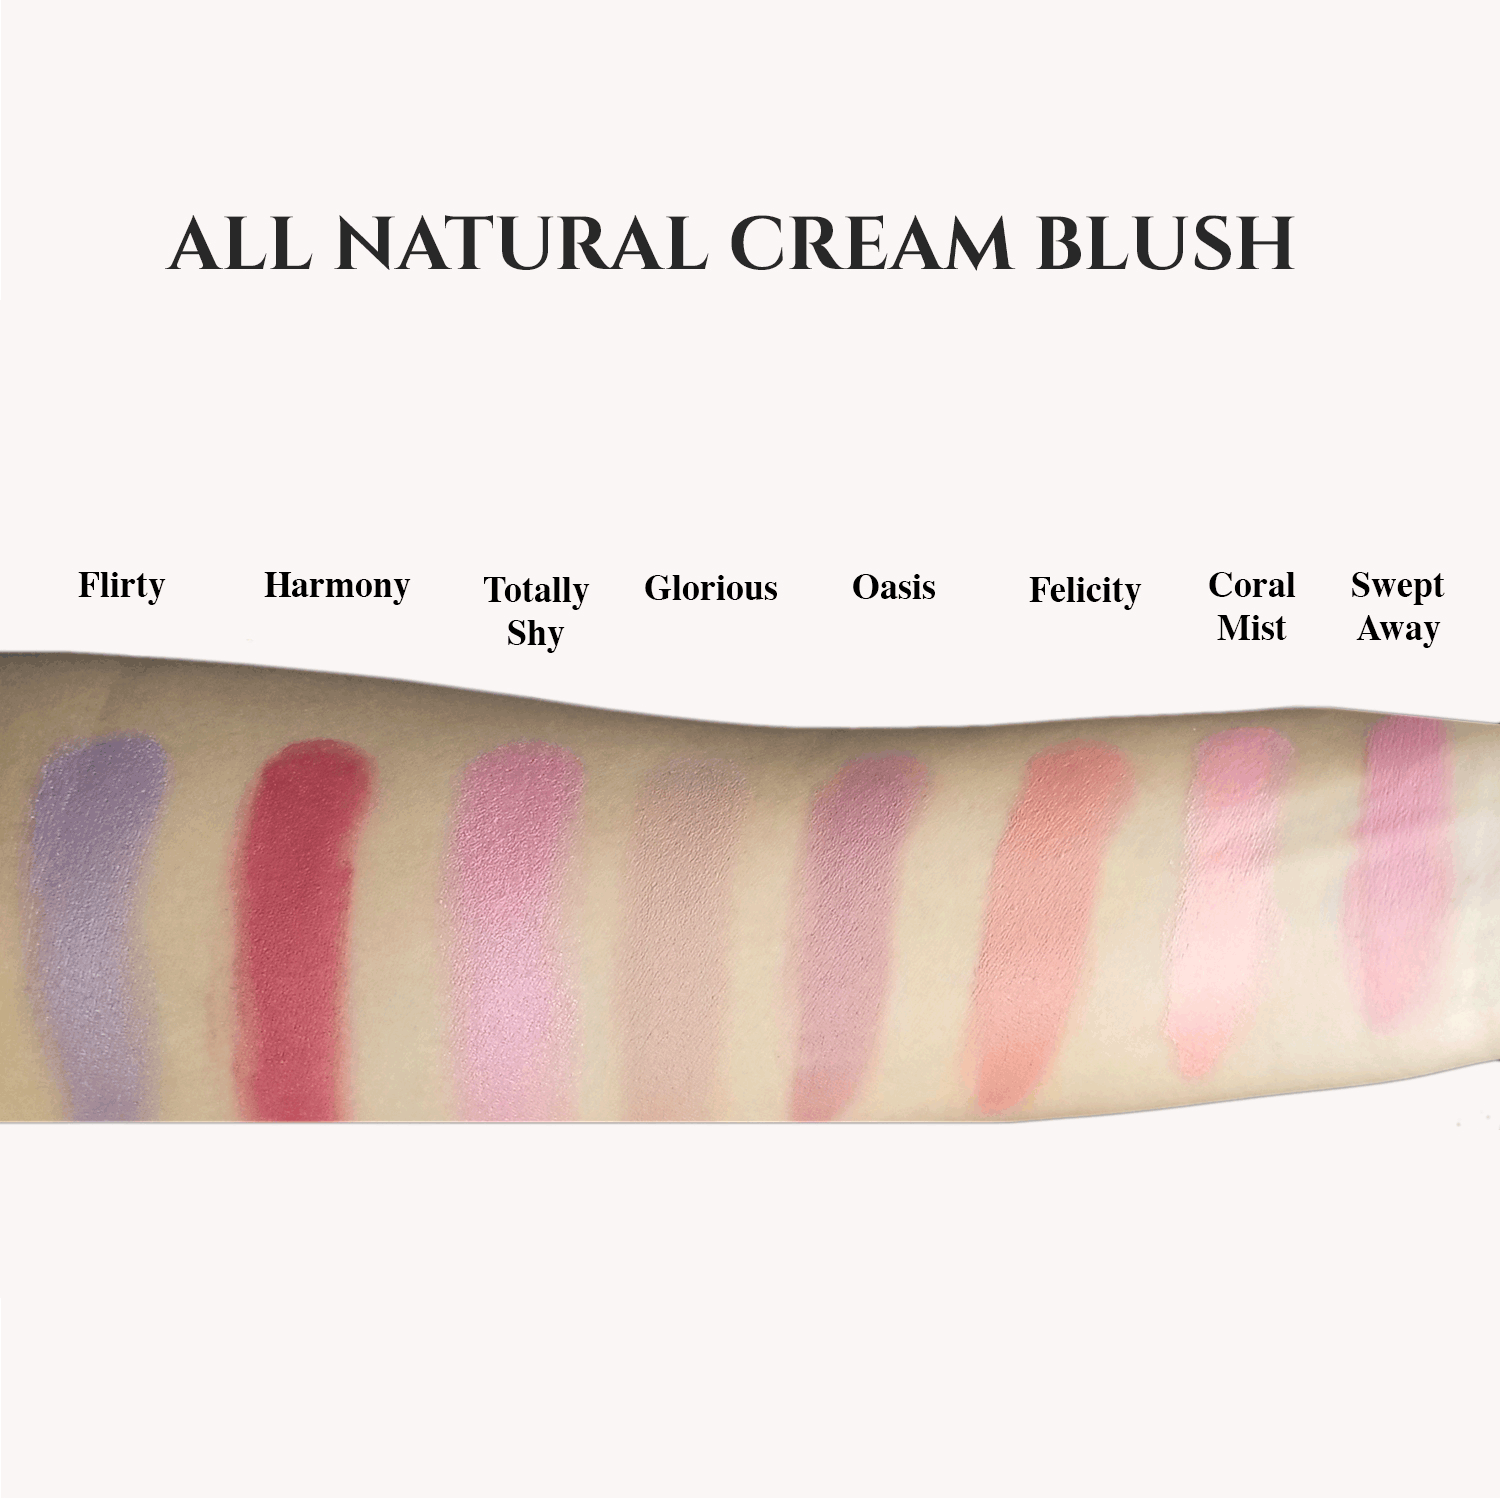 All Natural Blush Swatches